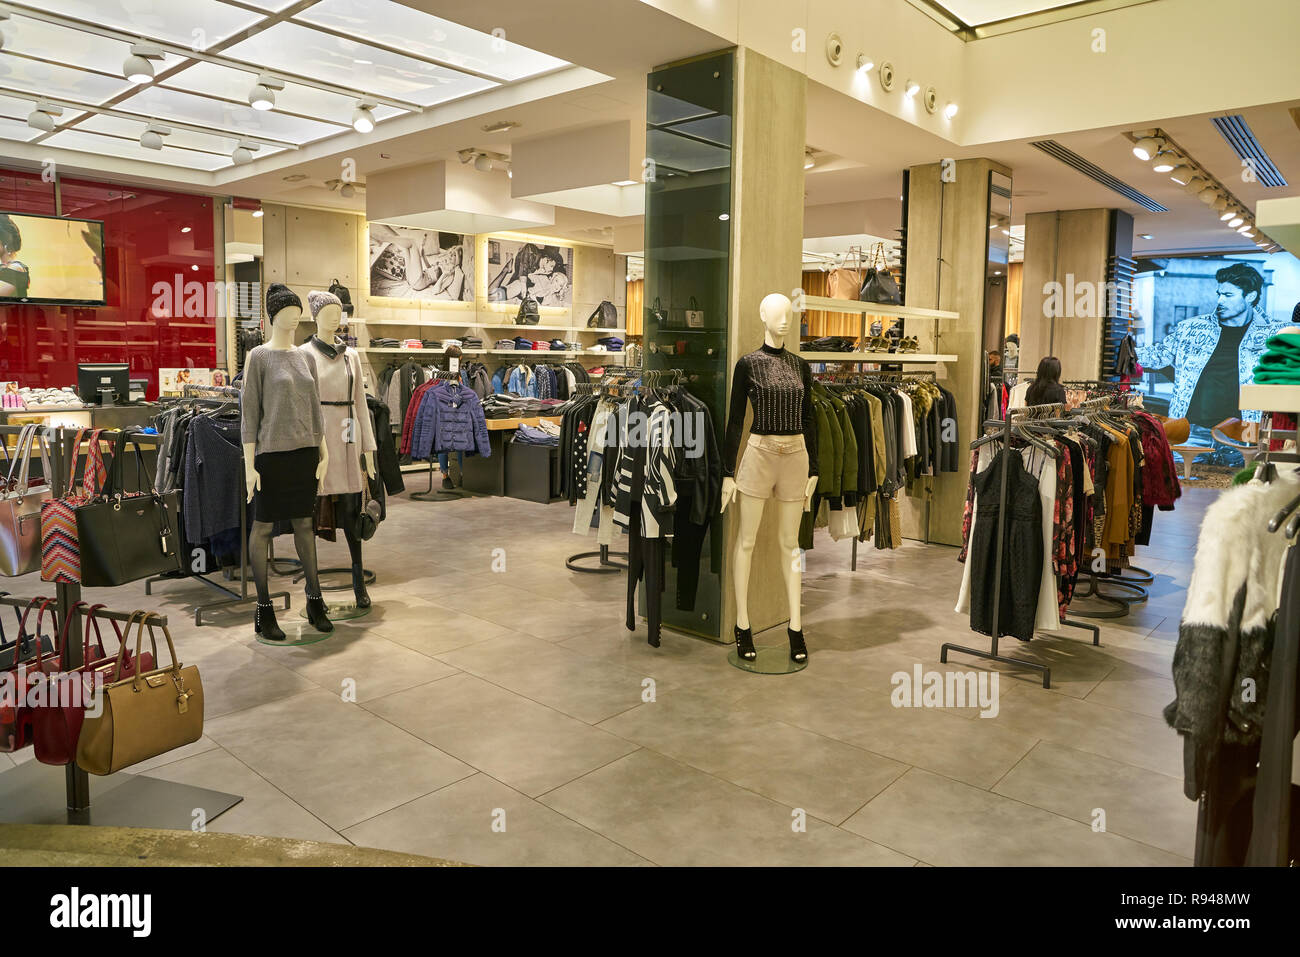 MILAN, ITALY - CIRCA NOVEMBER, 2017: inside Guess store in Milan. Guess is  an American clothing brand and retailer Stock Photo - Alamy